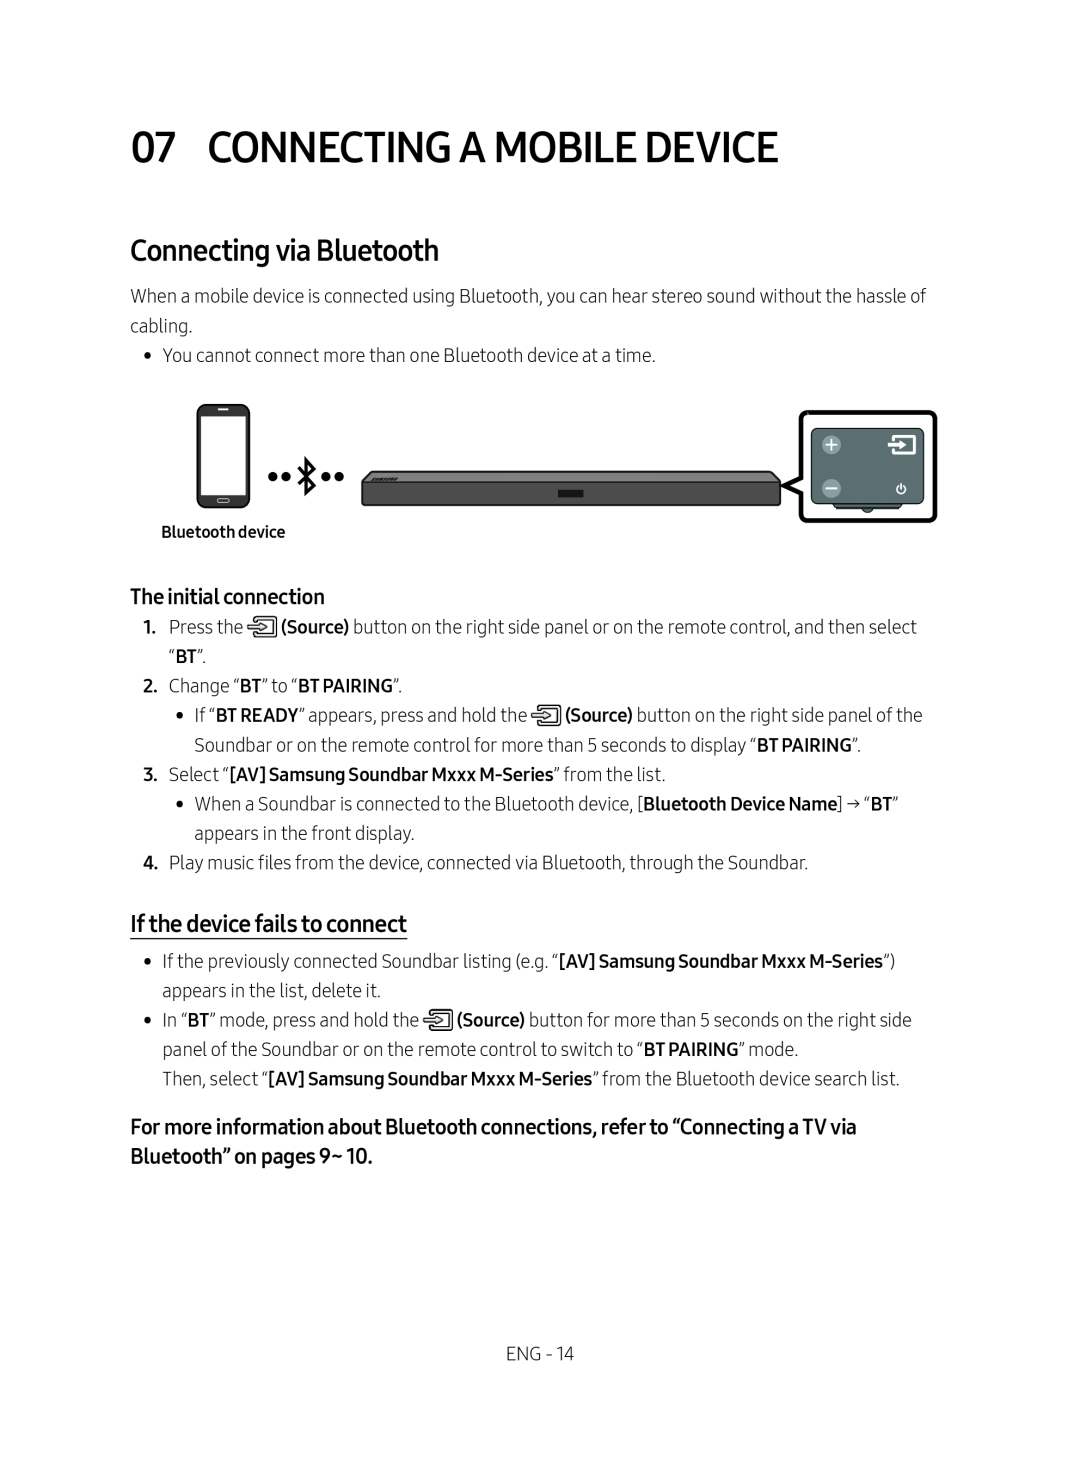 Samsung HW-M450/EN, HW-M450/ZG manual Connecting A Mobile Device, Connecting via Bluetooth, If the device fails to connect 